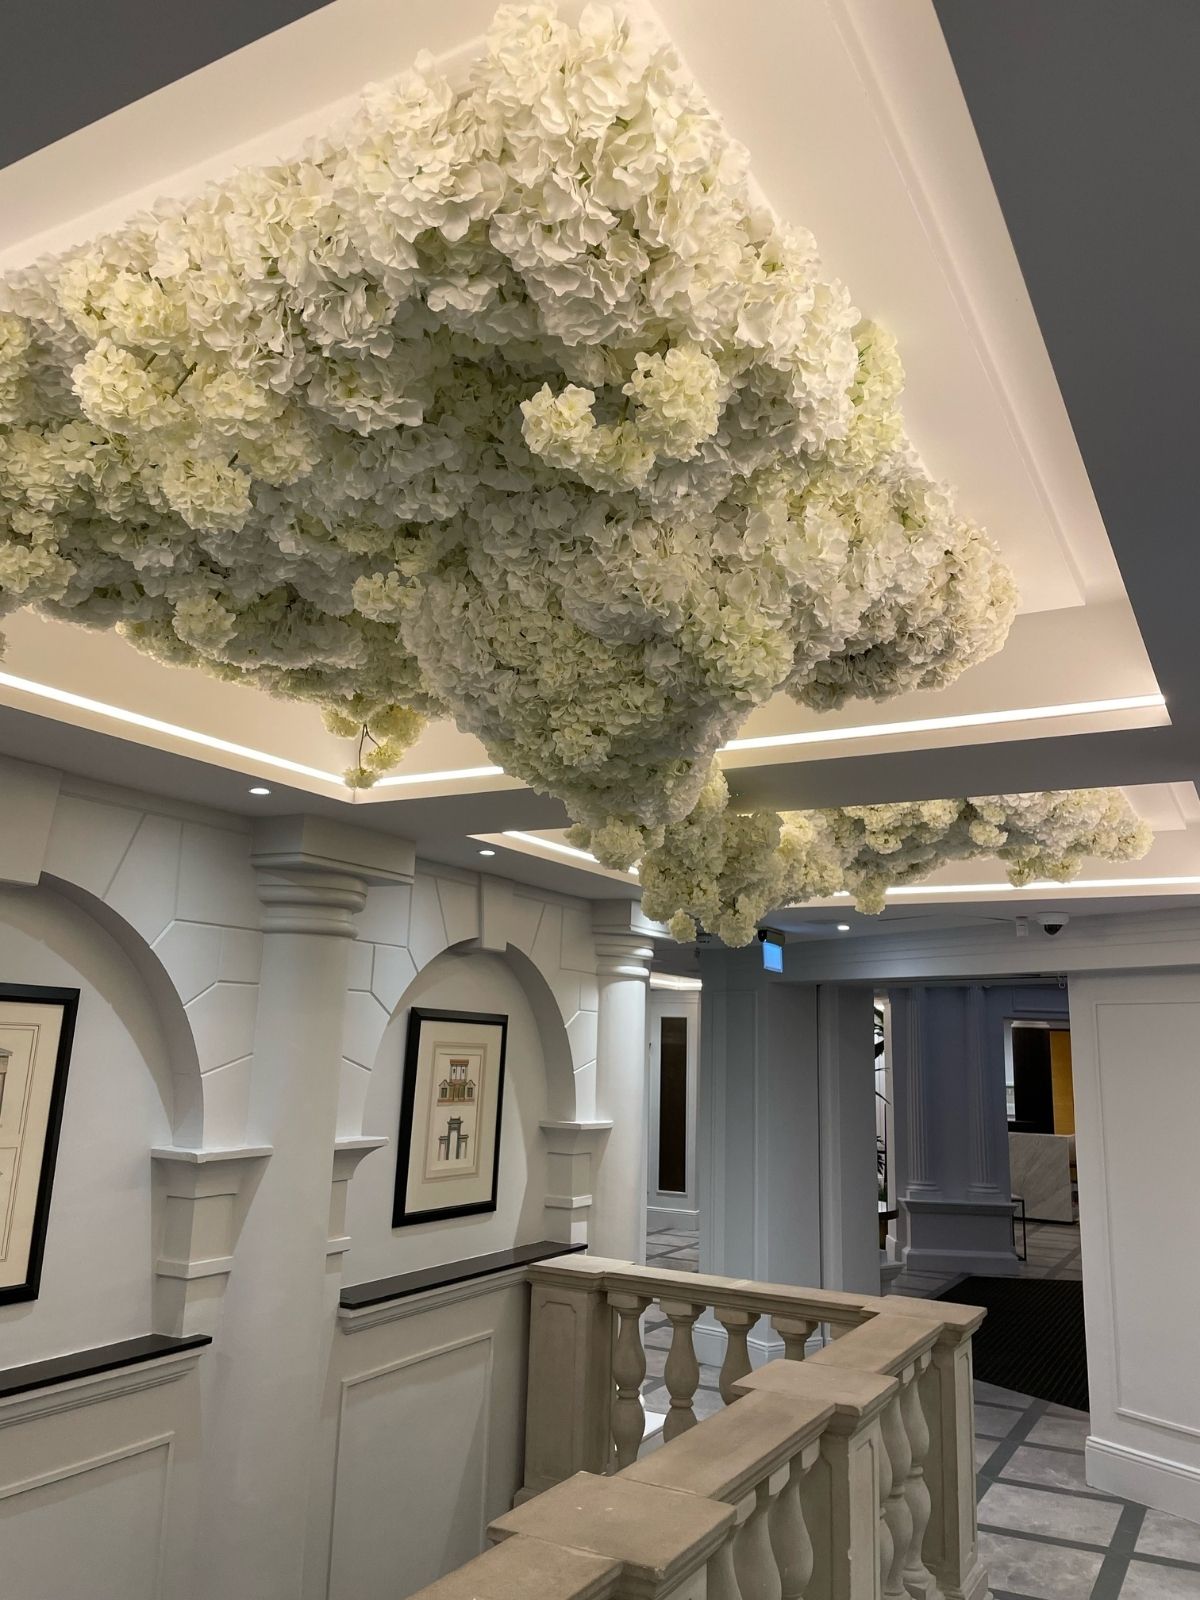 Silk White Hydrangeas from Pure in a Cloud for Davenport Hotel in Dublin by Joan Stam